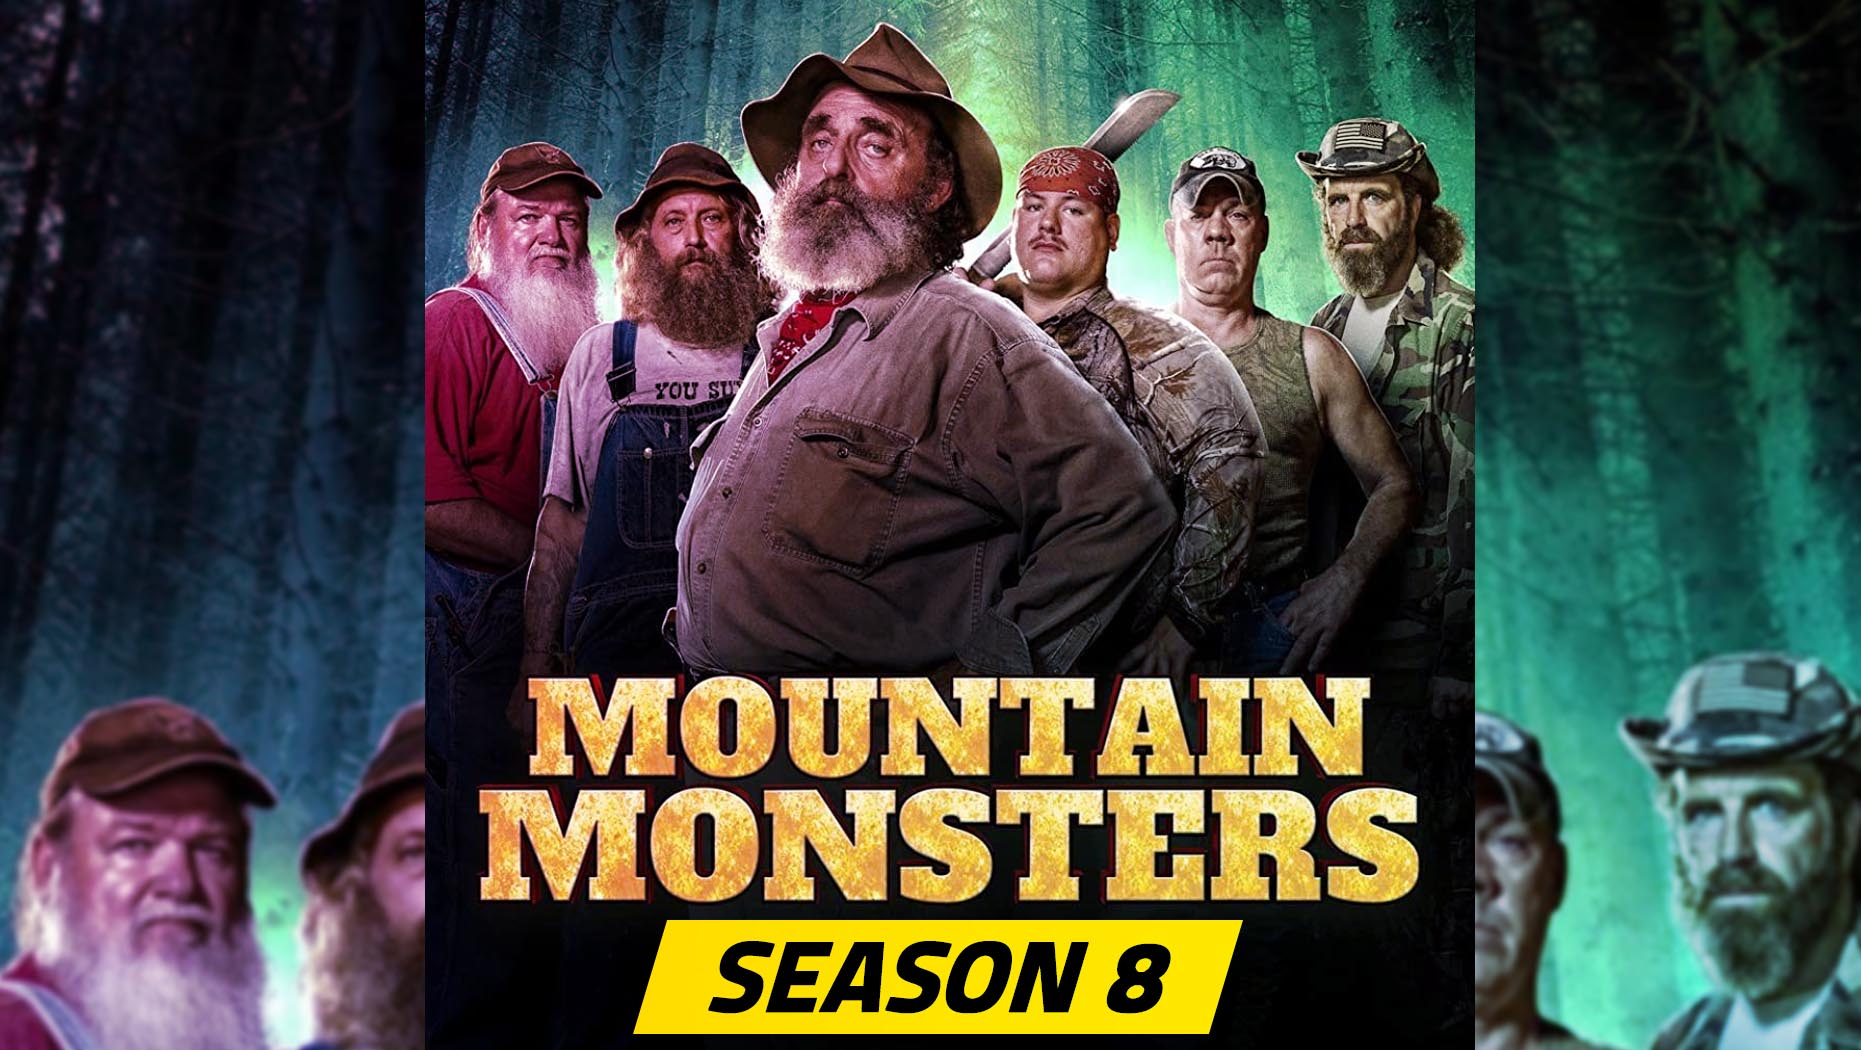 Mountain Monsters Season 8 (2021) with All Episodes | iOffer Movies